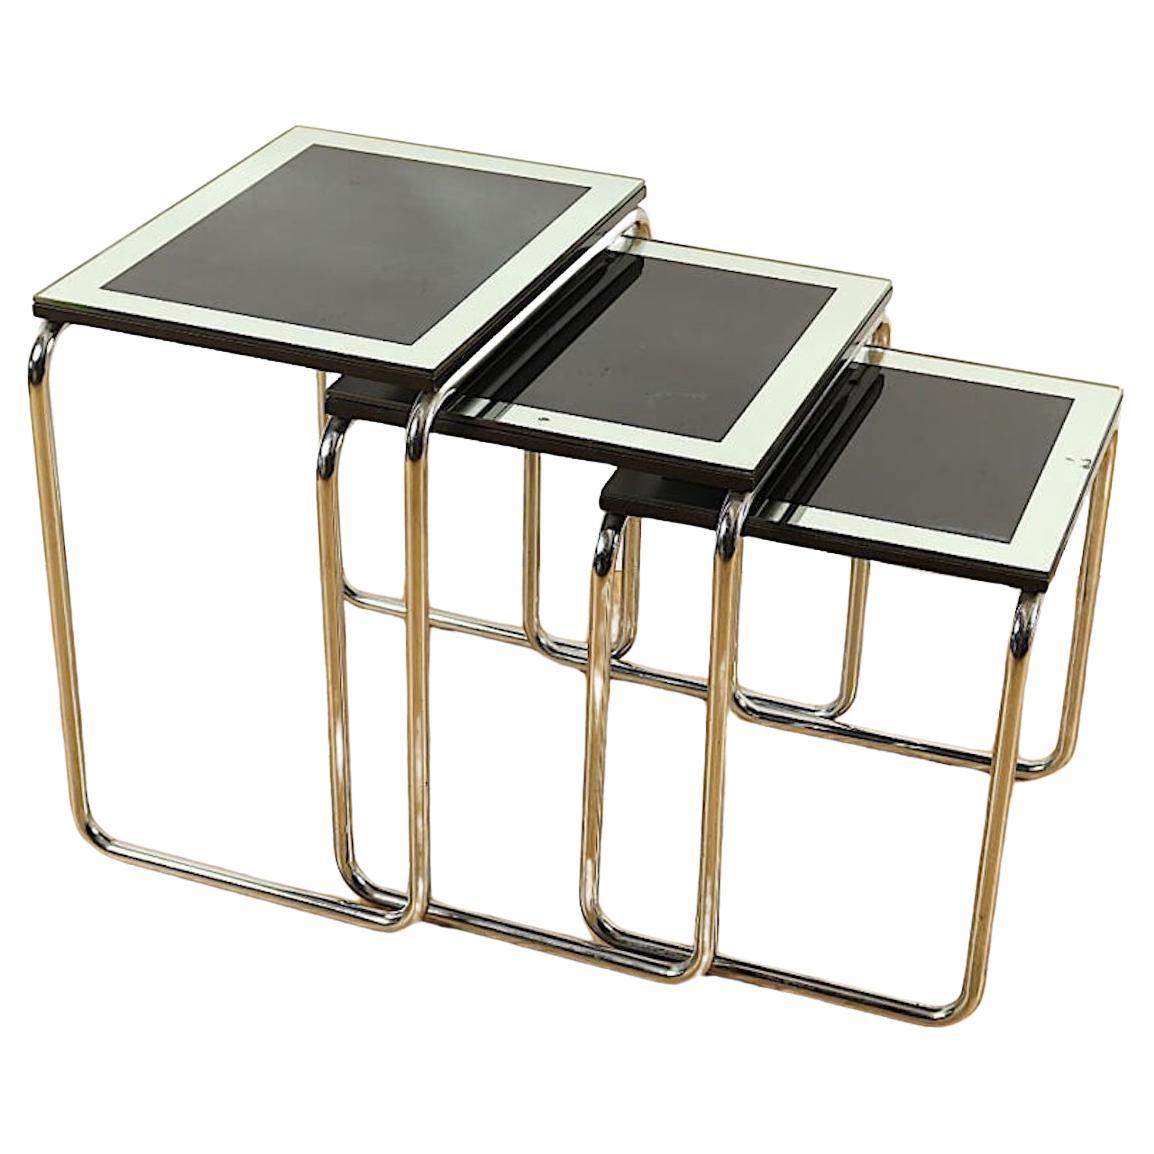 1 set of three Art Déco Nesting tables. England 1920s. Chromed with Glass.